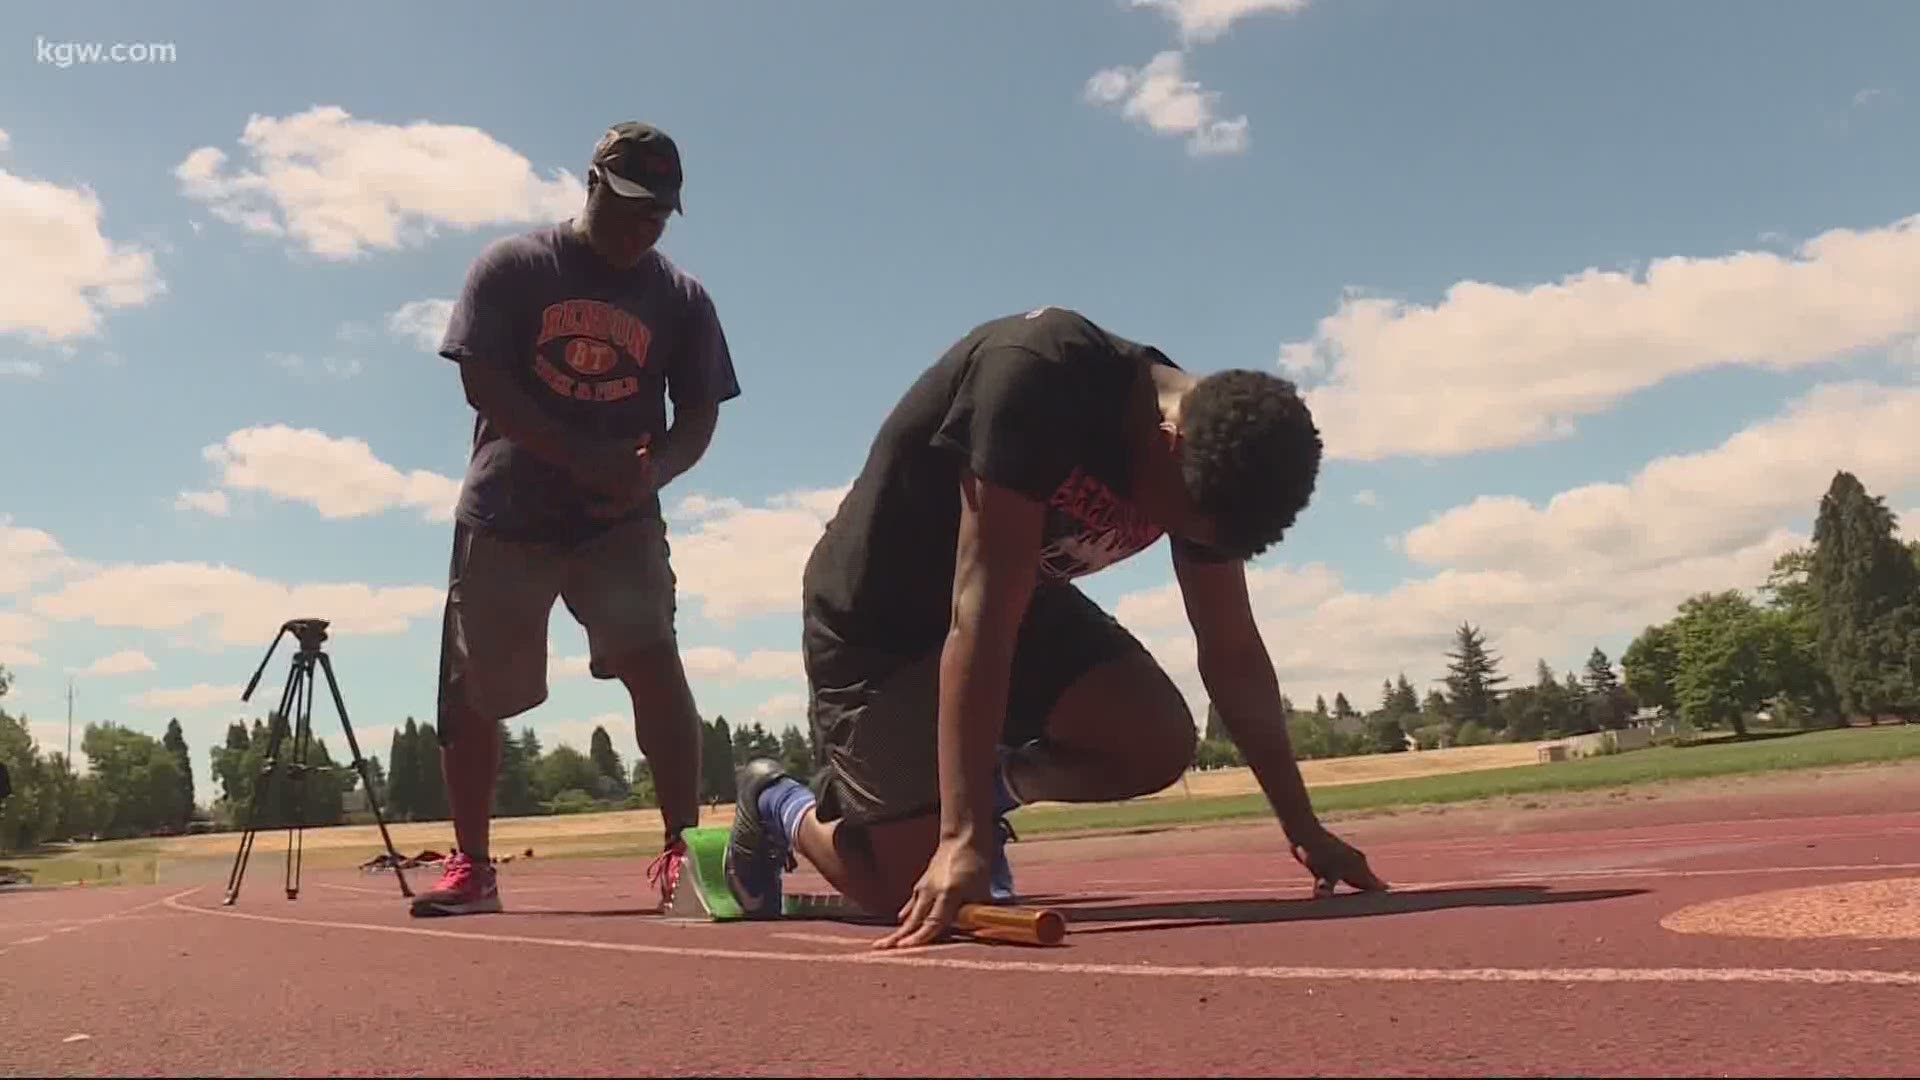 Micah Williams set Oregon state records in the 100-meter and 200-meter dash. He'll take his talents to Eugene.